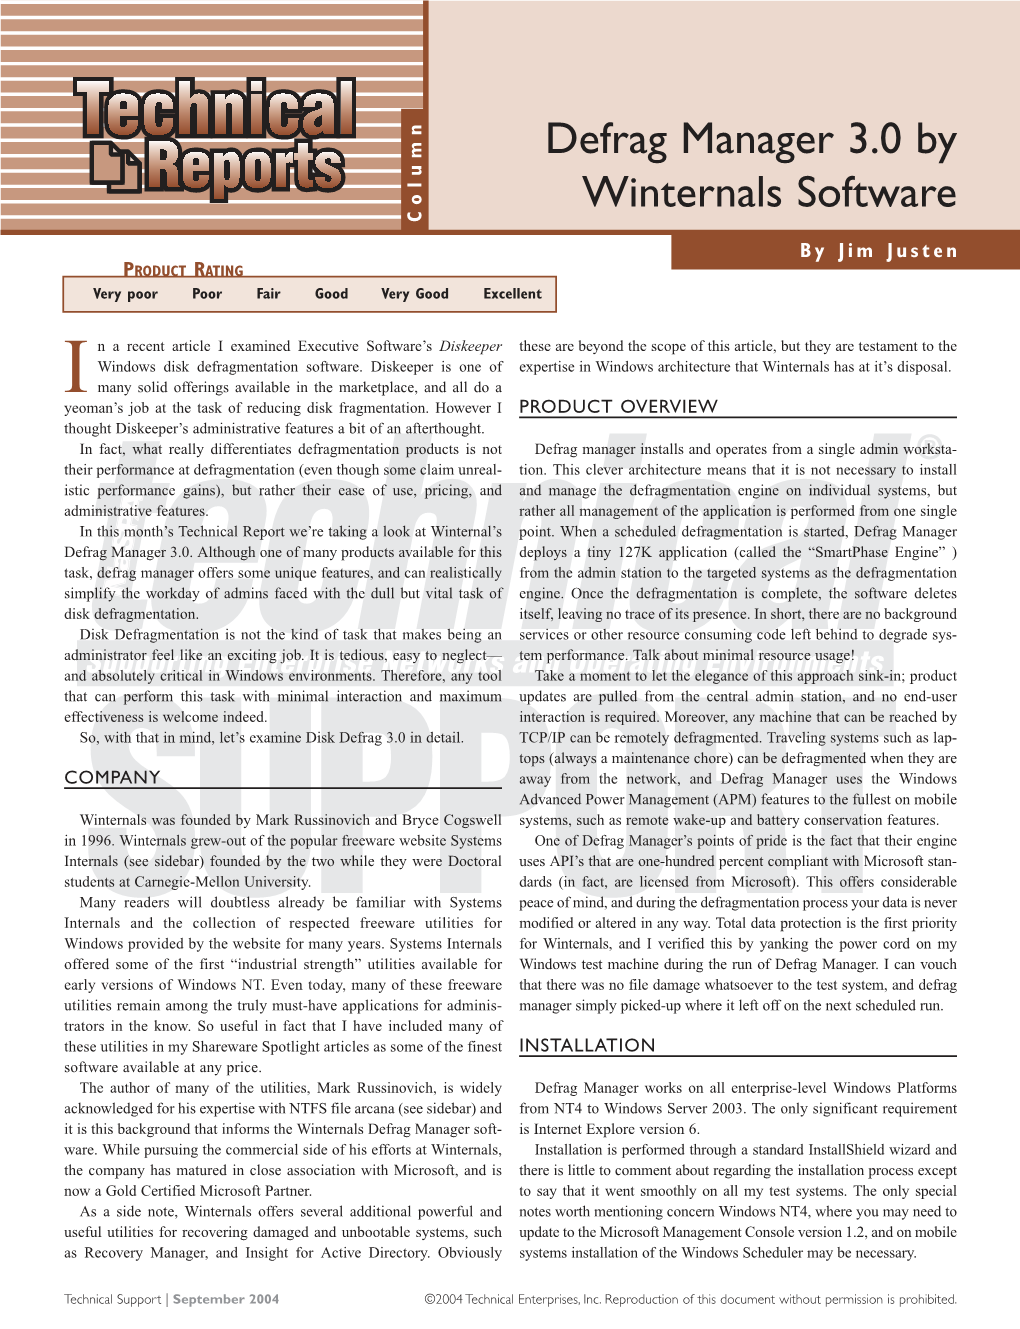 Defrag Manager 3.0 by Winternals Software Column by Jim Justen PRODUCT RATING ❑ Very Poor ❑ Poor ❑ Fair ❑ Good ❑ Very Good ✗❑ Excellent